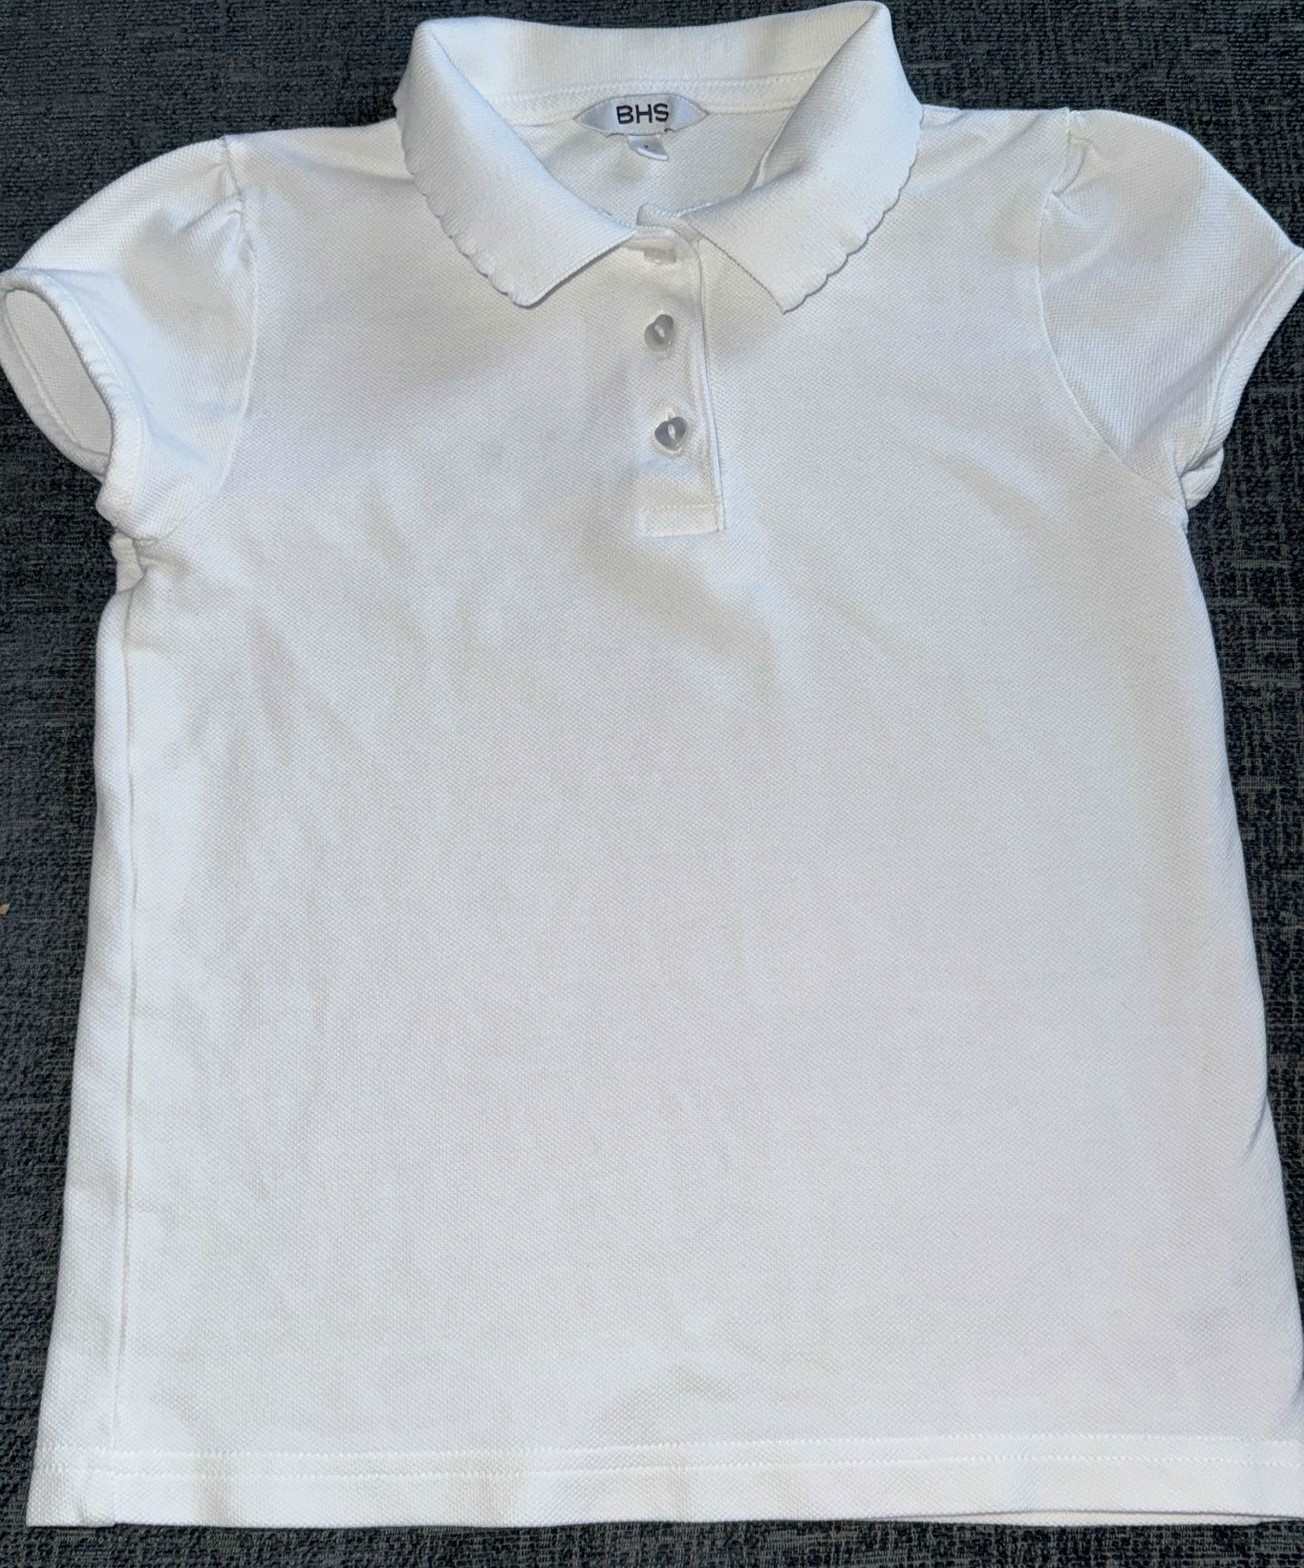 Polo shirt 9-10 / 10 yrs (with frilled collar)